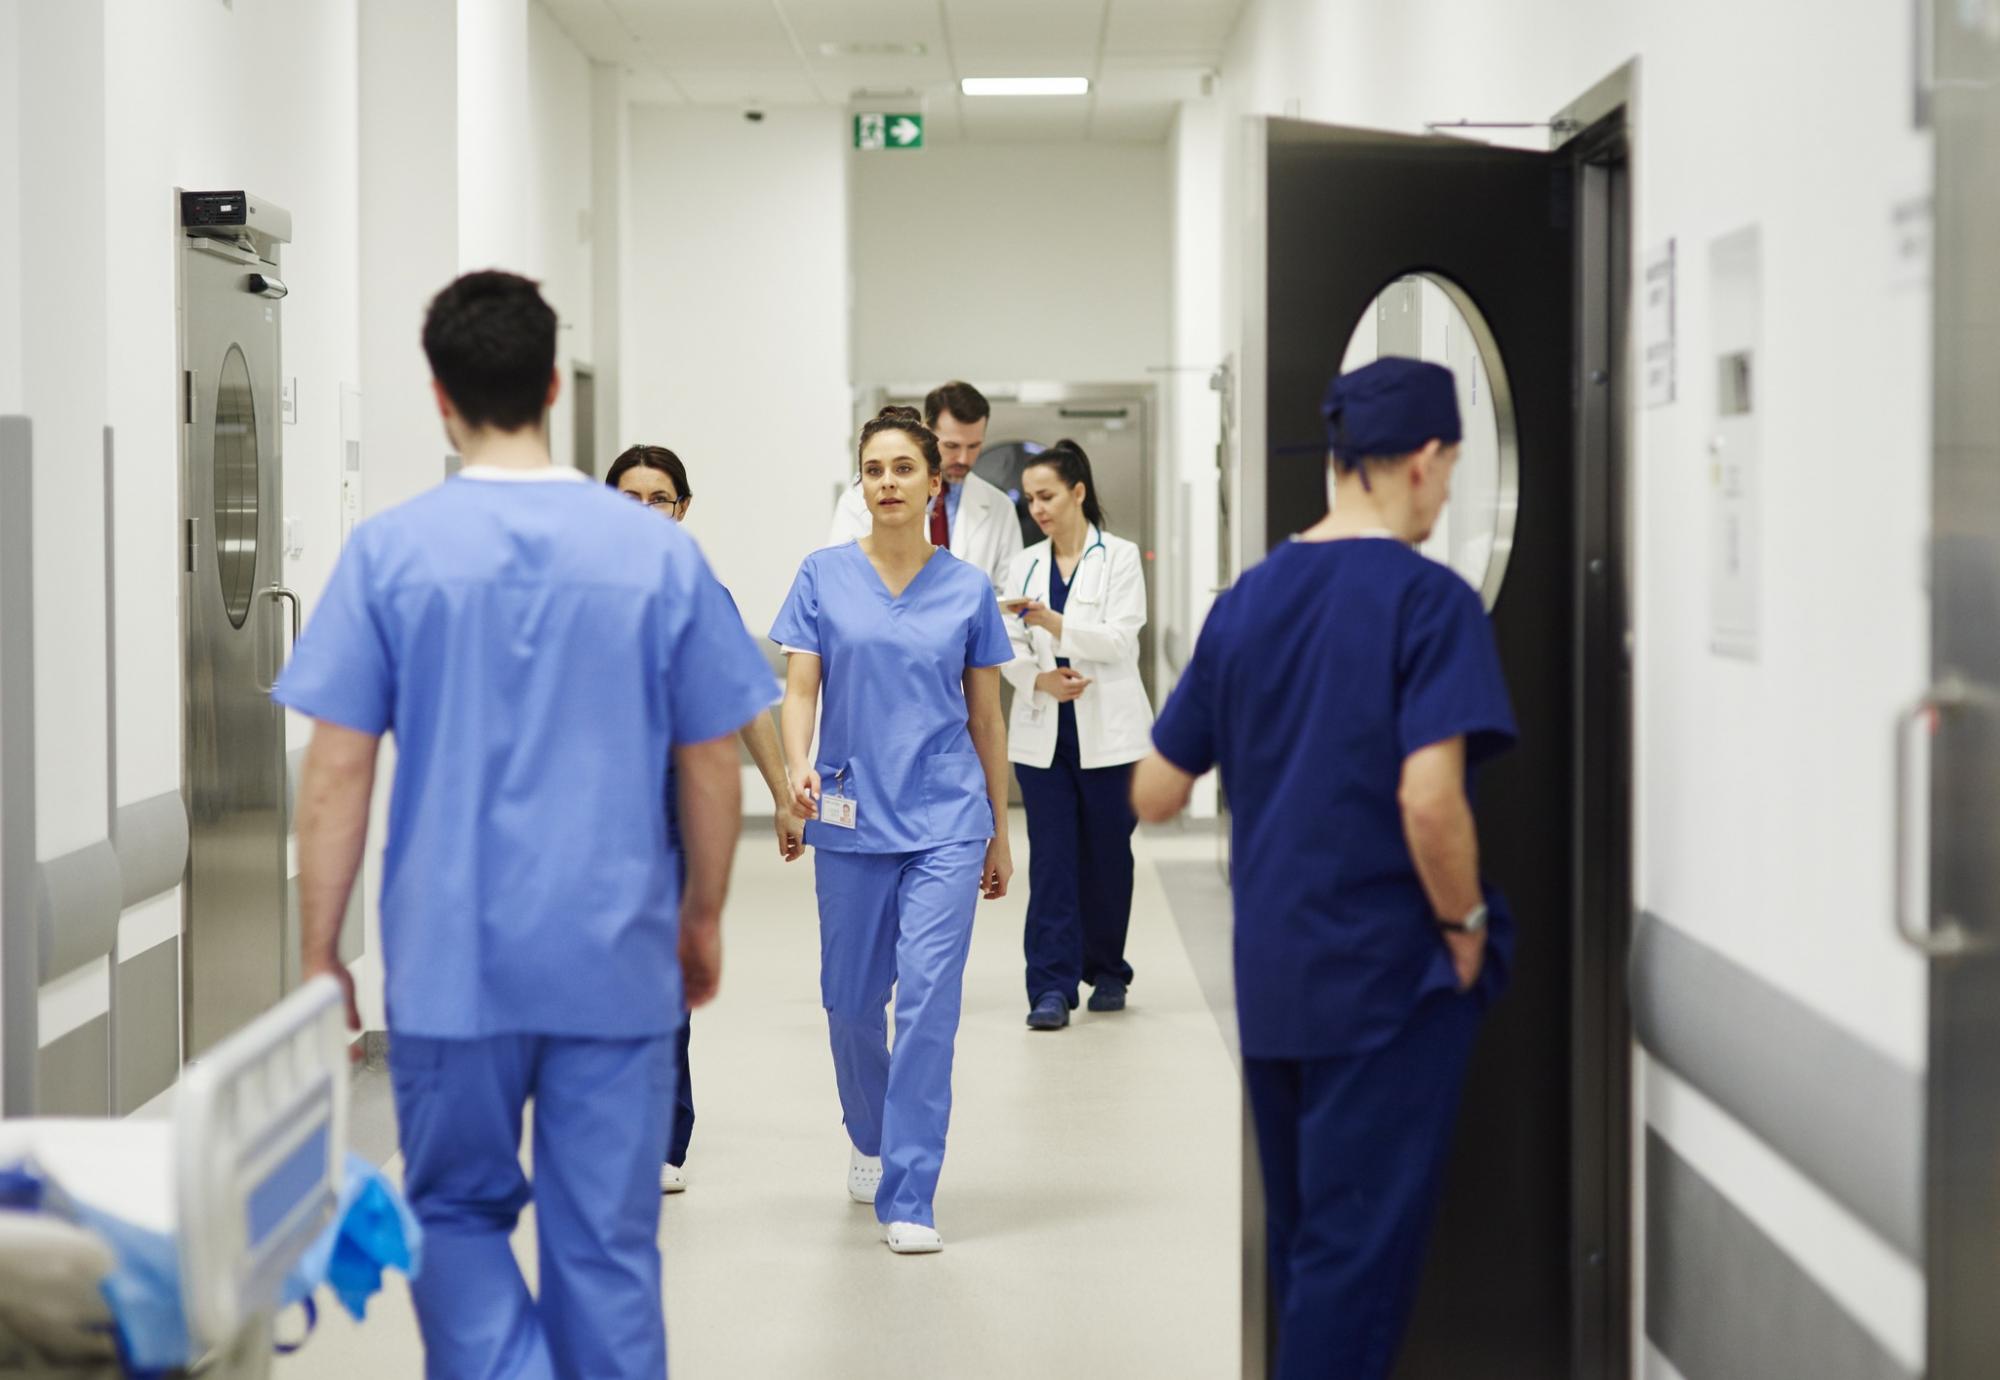 Health professionals in a busy hospital corridor